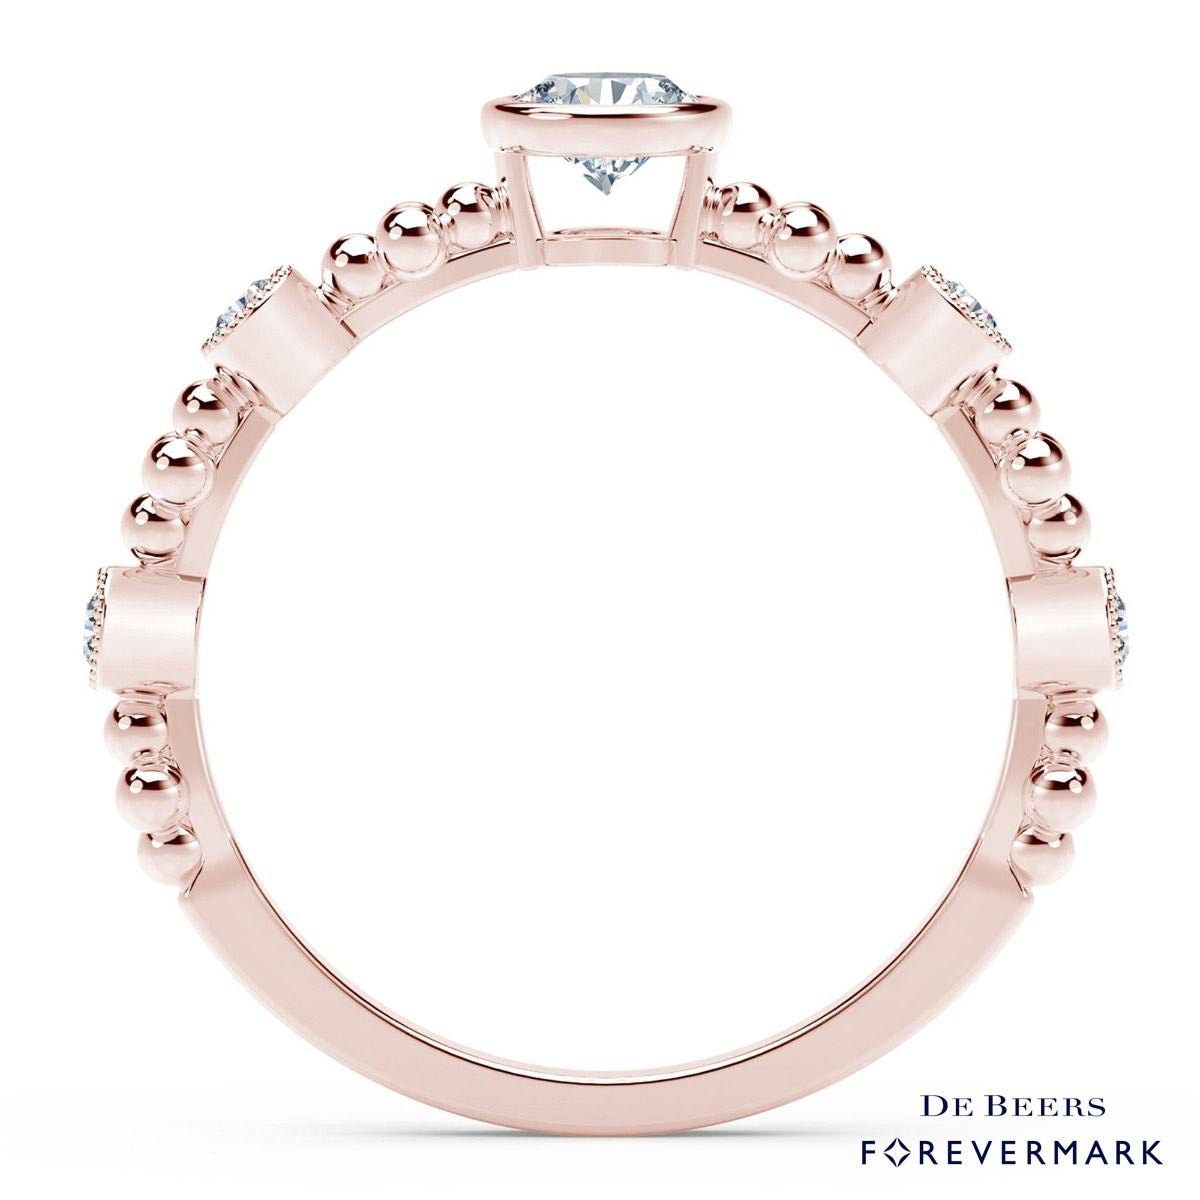 De Beers Forevermark Tribute Collection Feminine Diamond Ring in 18kt Rose Gold (1/5ct tw)